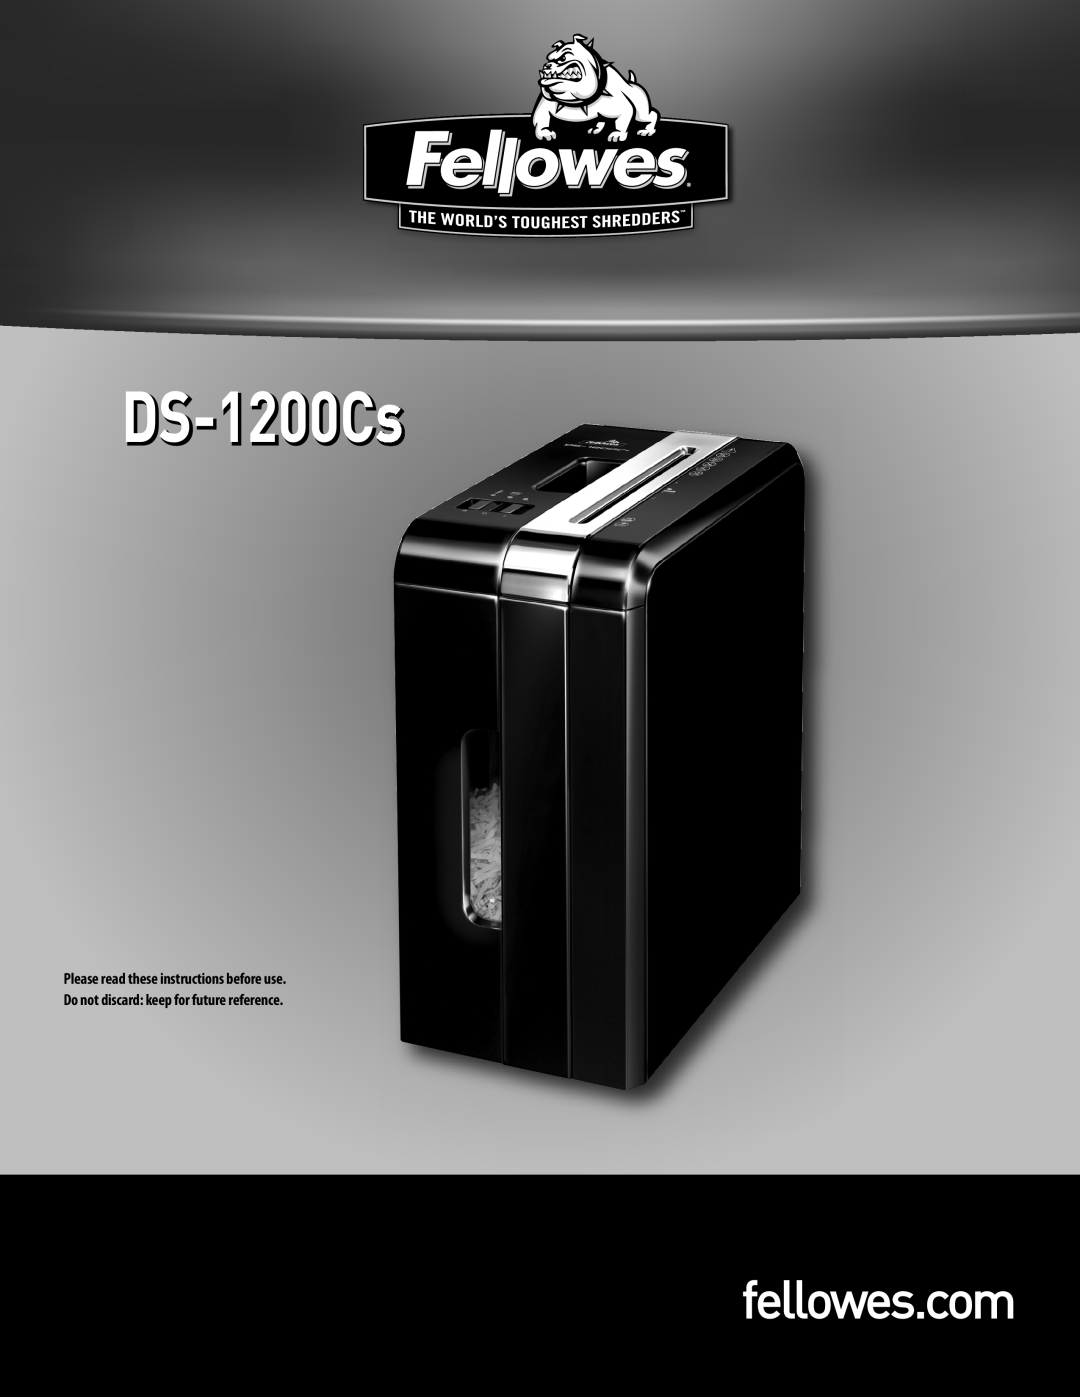 Fellowes manual DS-1200Cs, fellowes.com, Please read these instructions before use 